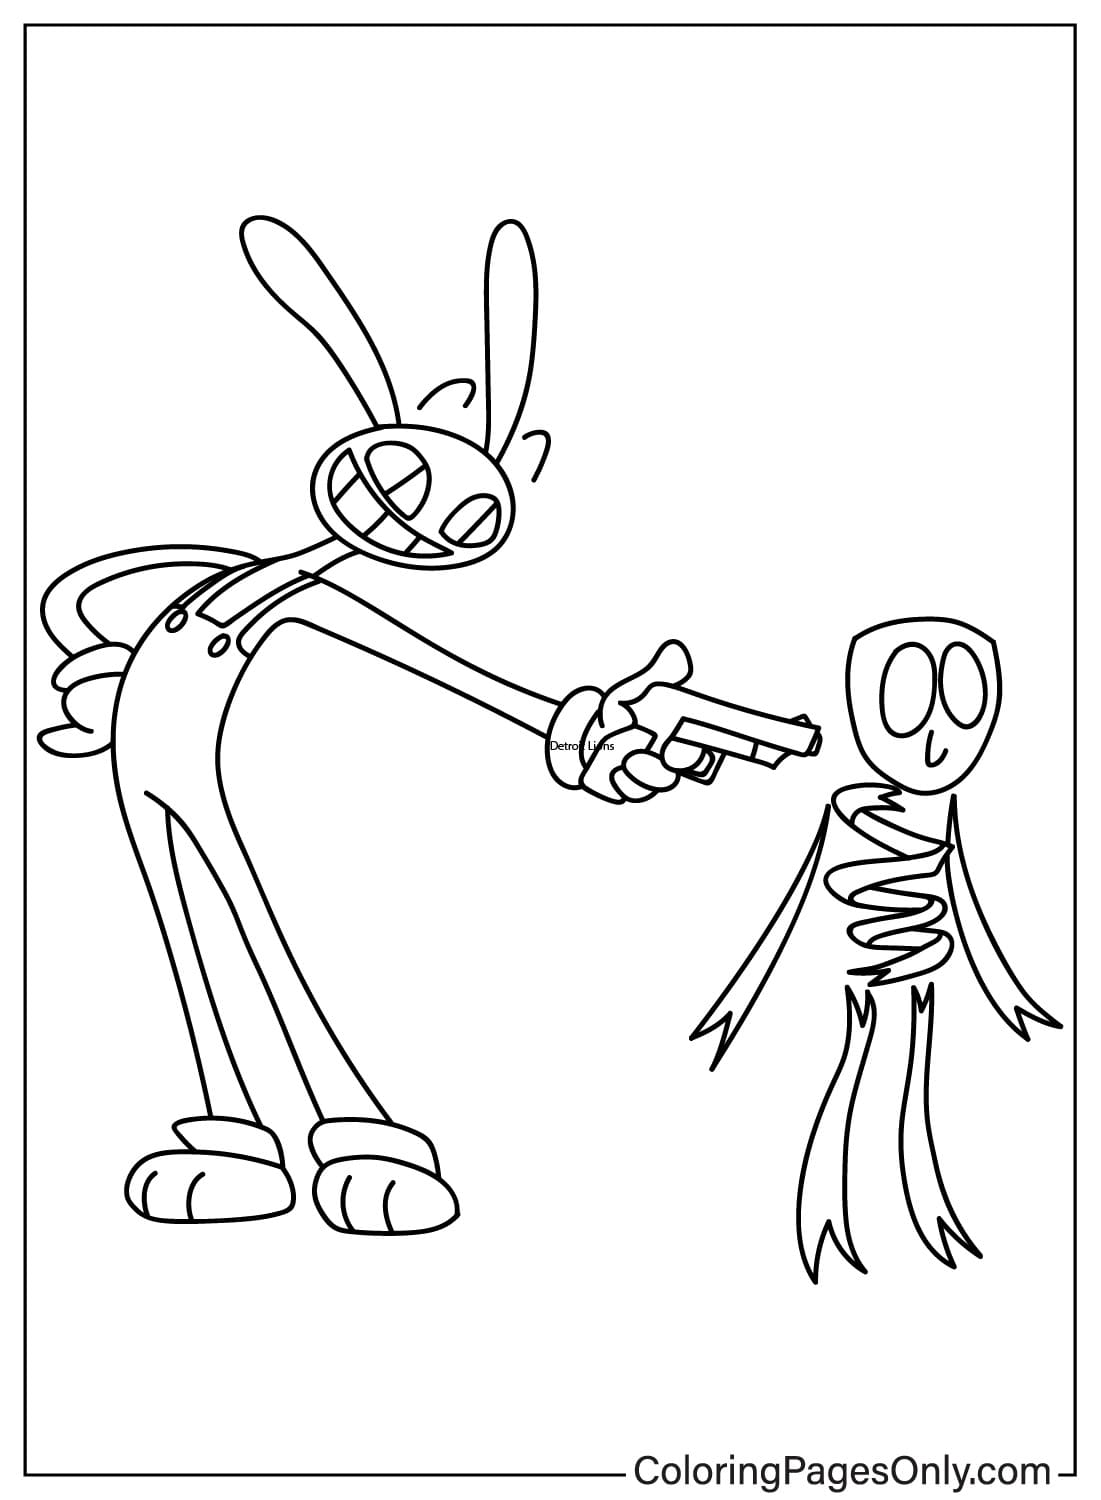 Gangle and Jax Coloring Page from The Amazing Digital Circus